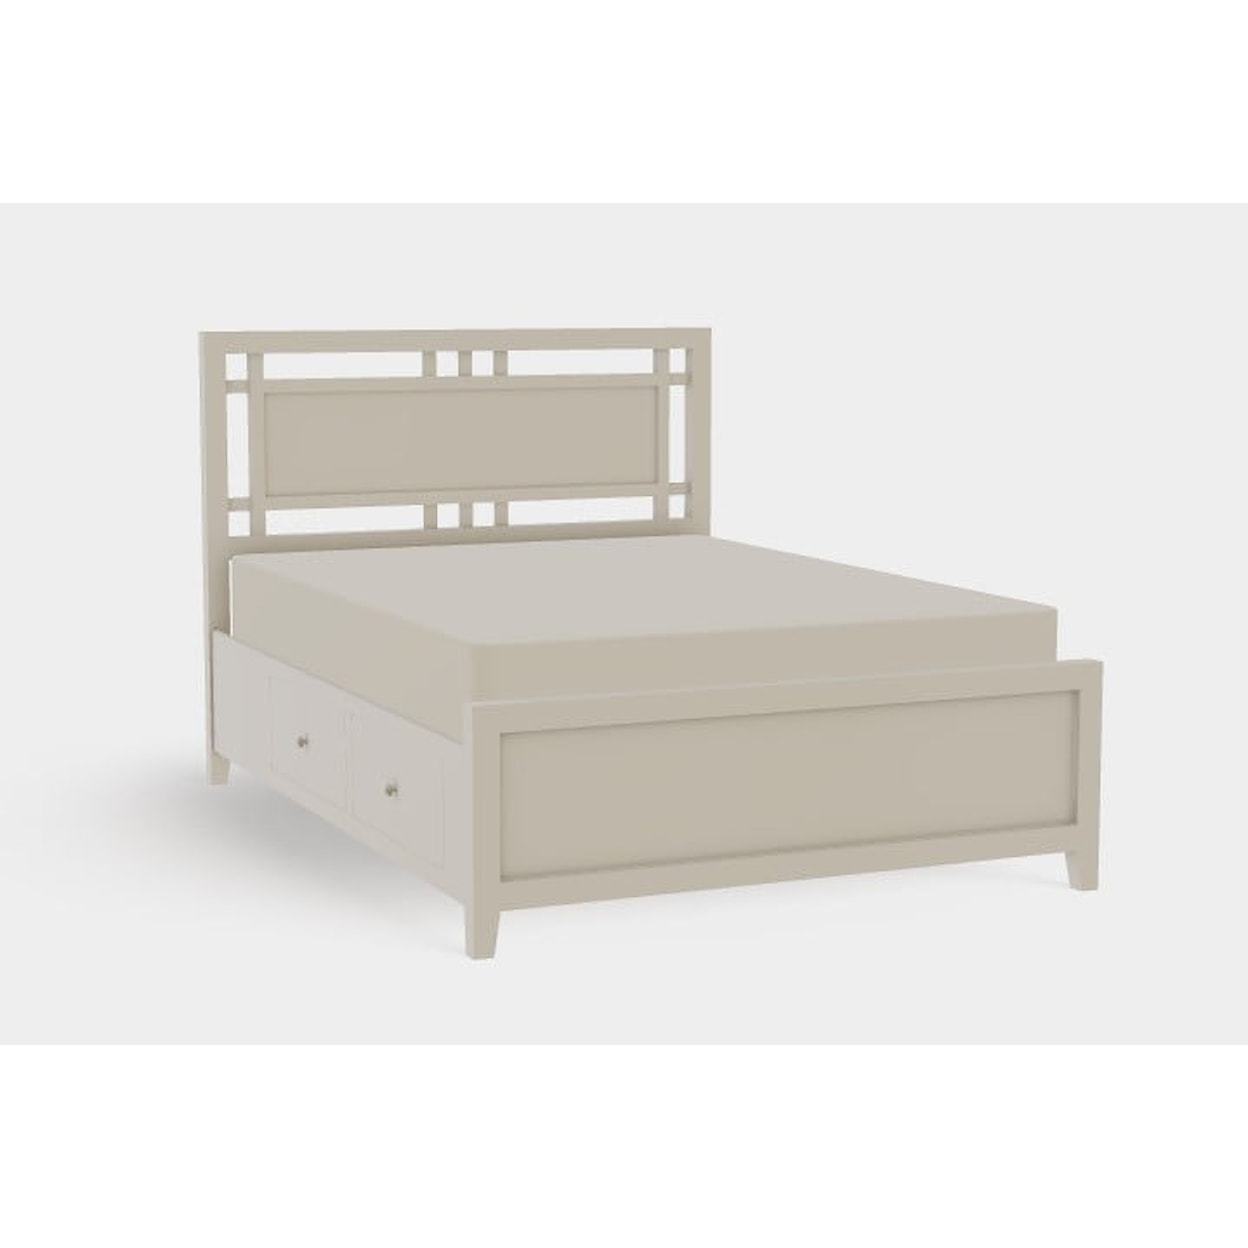 Mavin Atwood Group Atwood Queen Left Drawerside Gridwork Bed